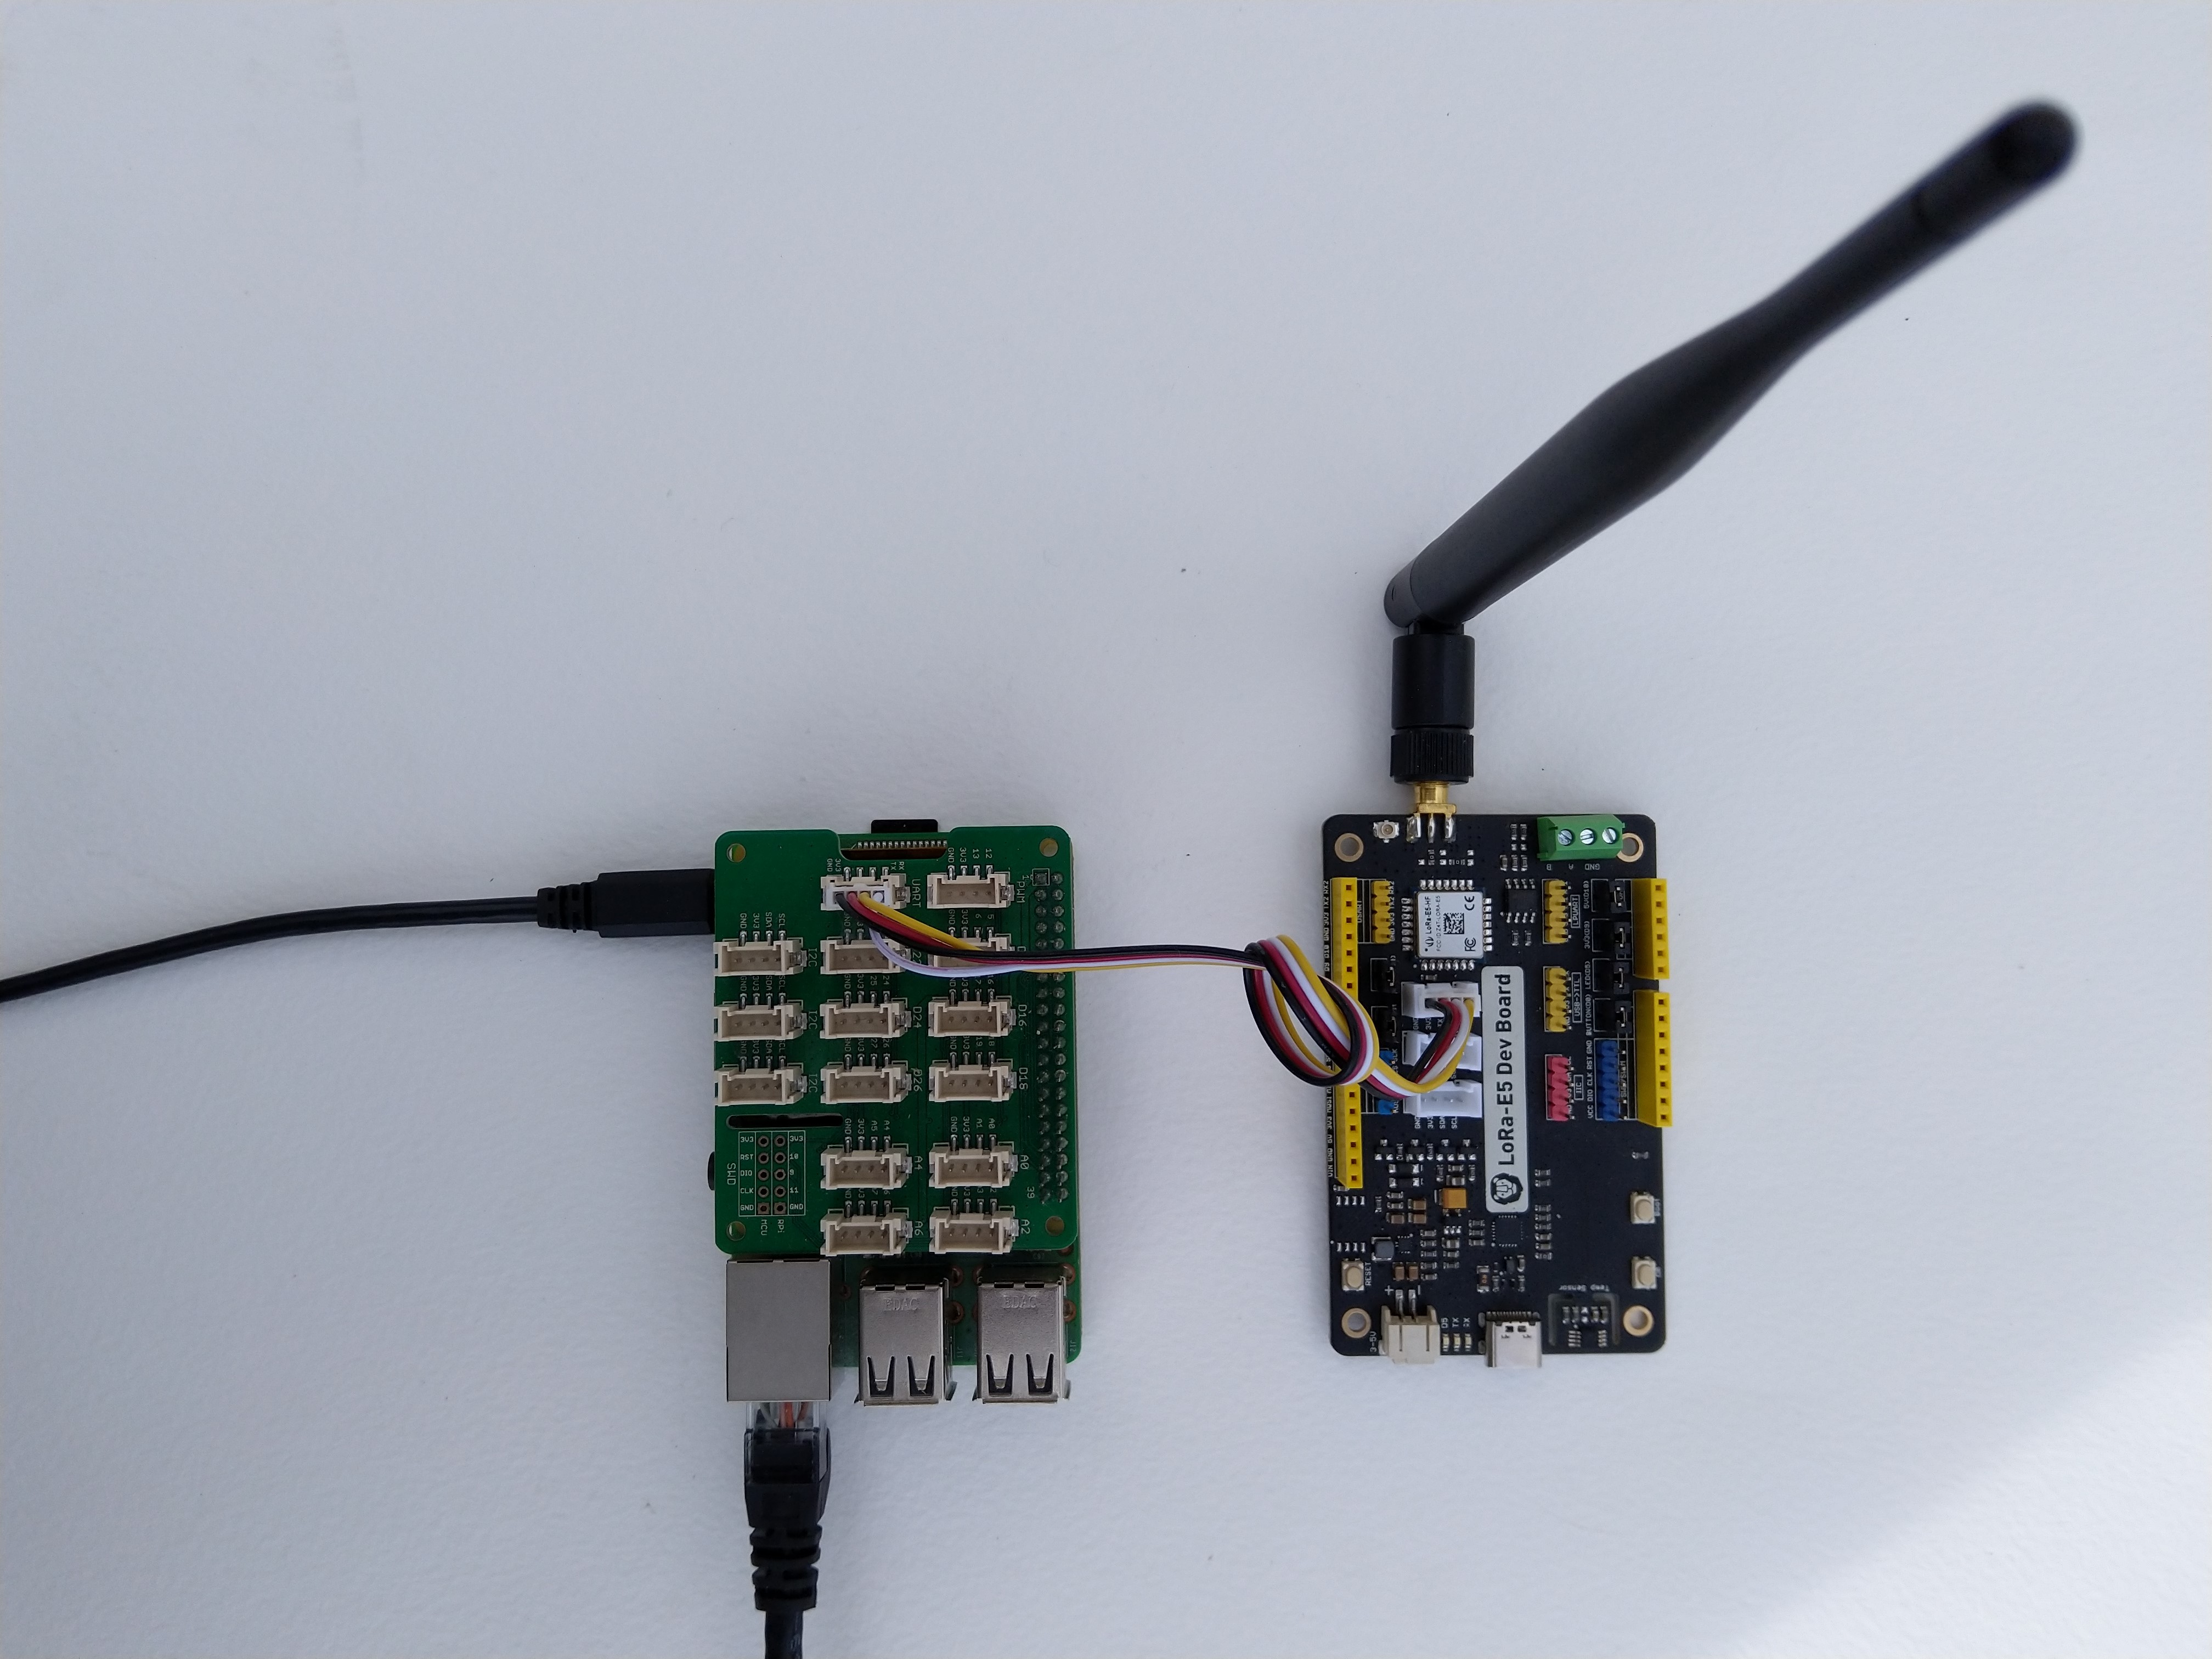 LoRa-E5 connected to RPI 3 device